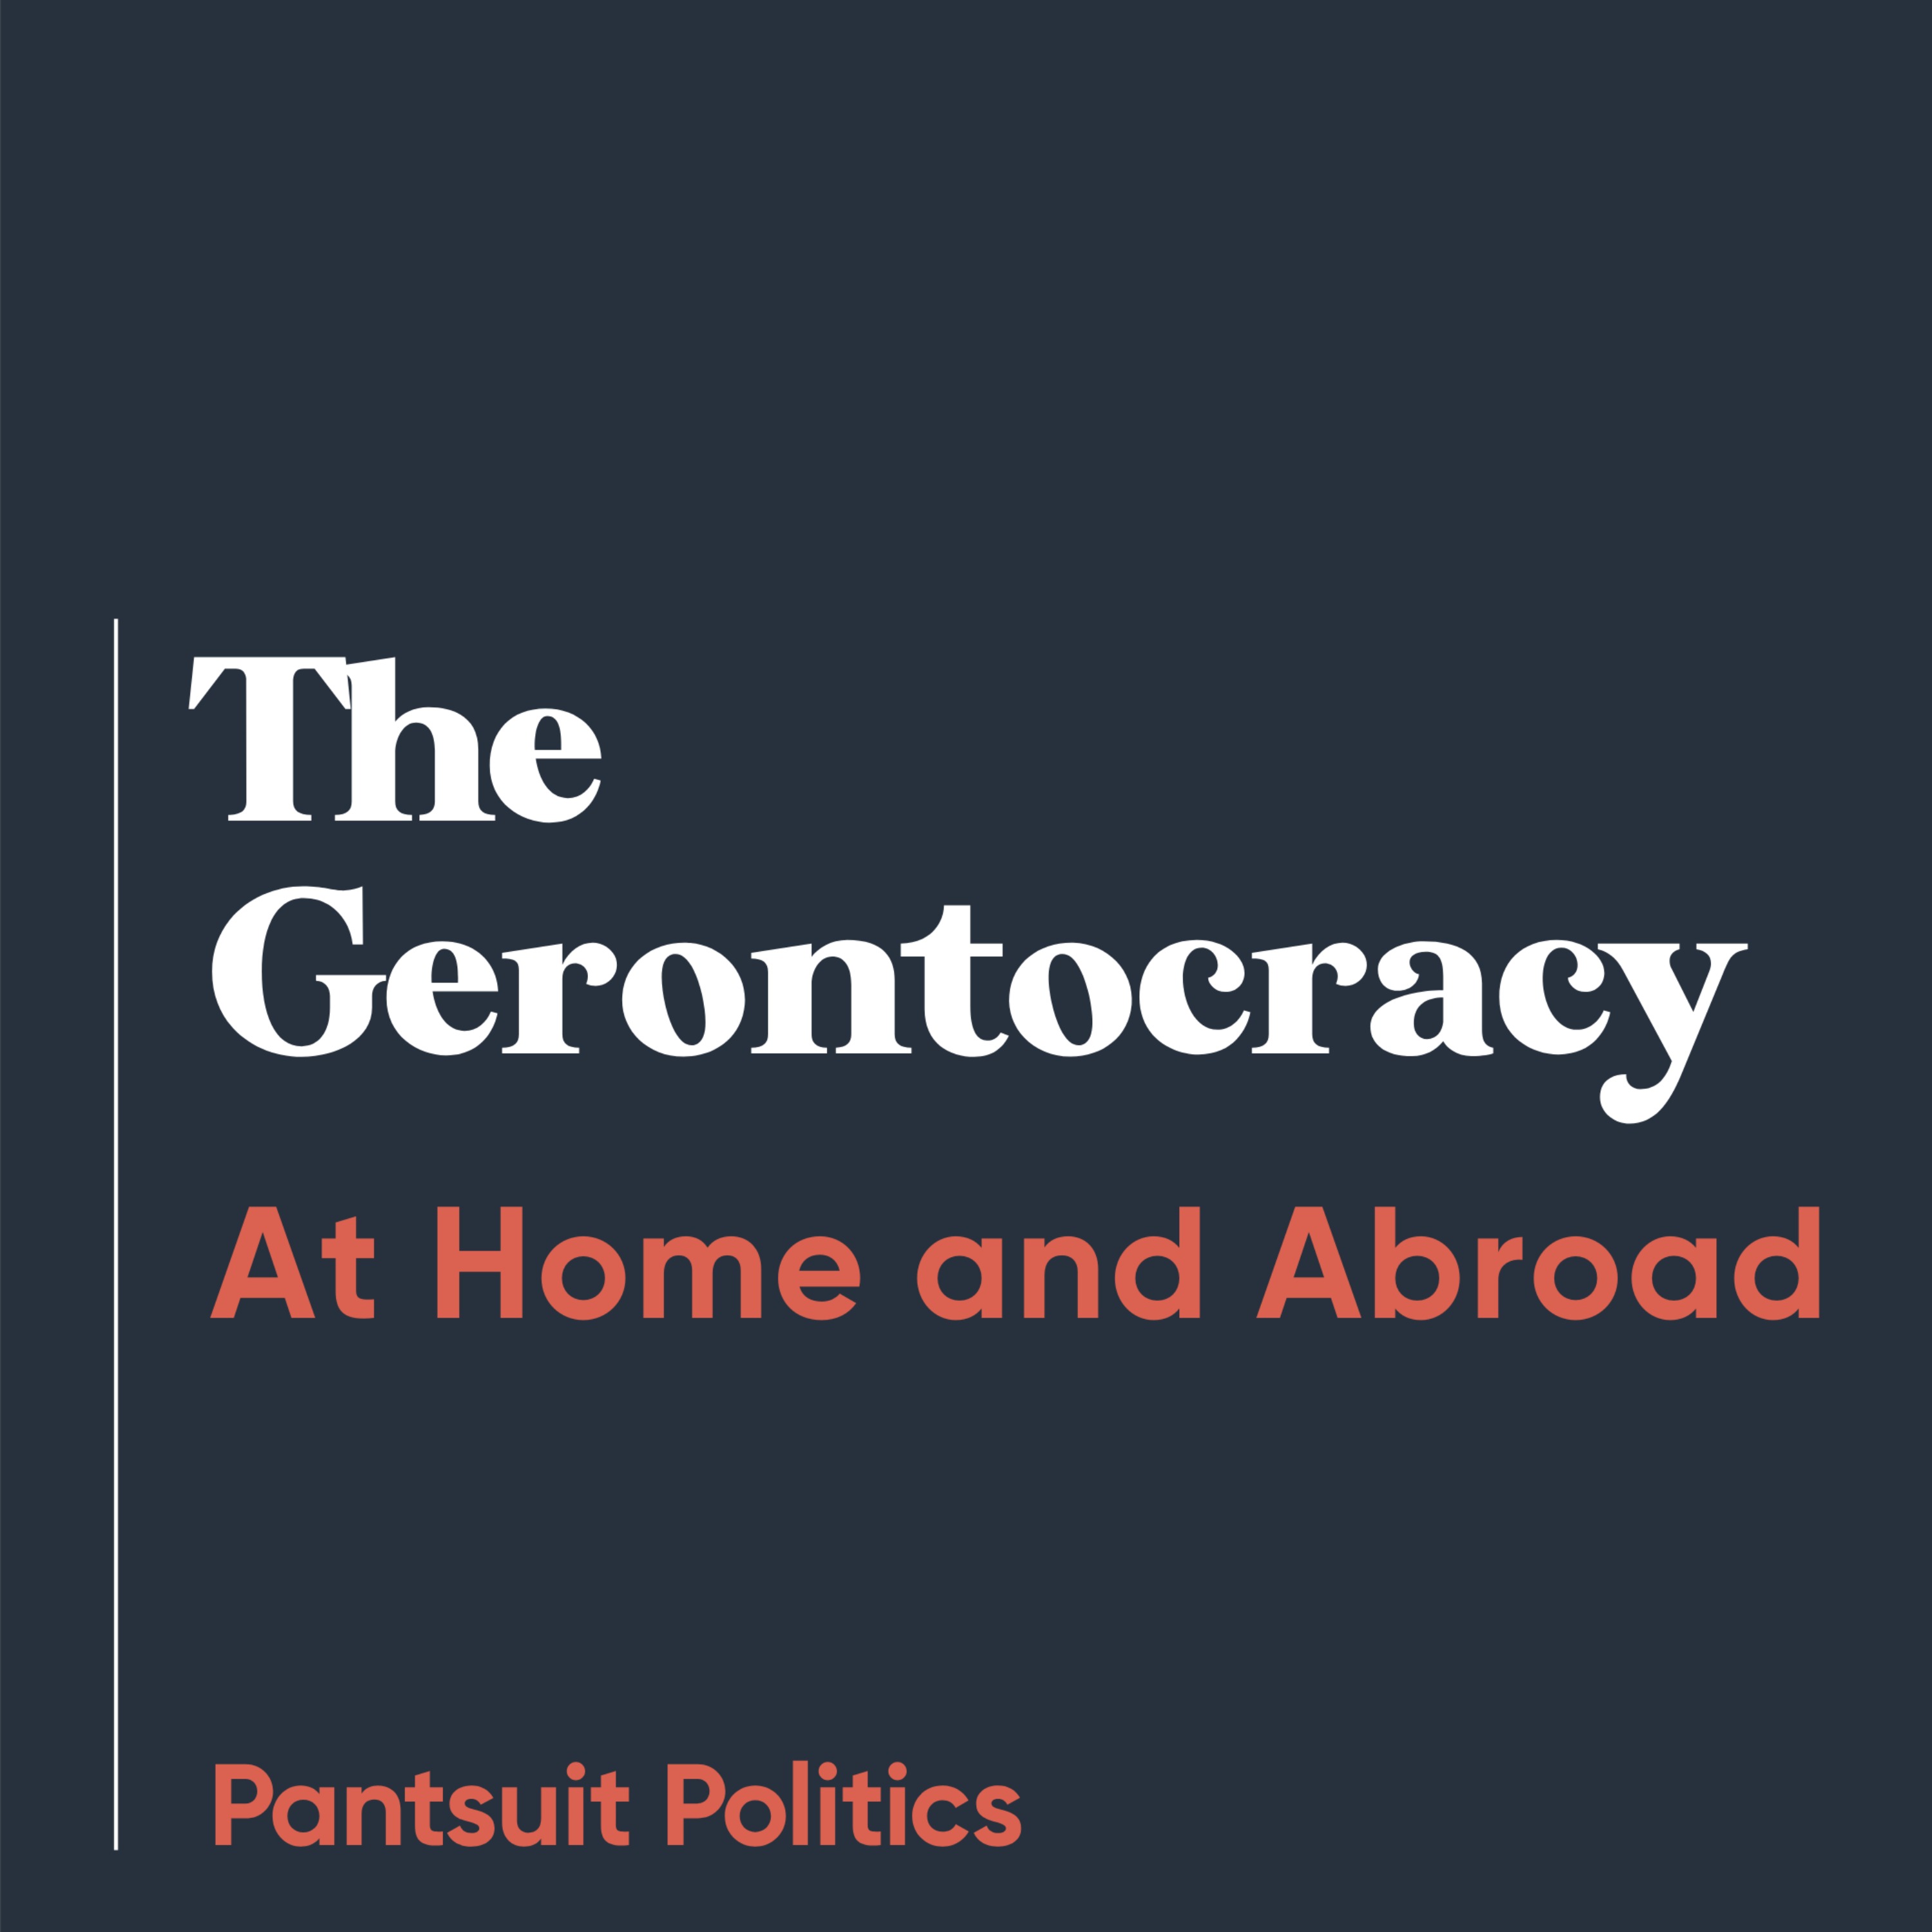 The Gerontocracy at Home and Abroad